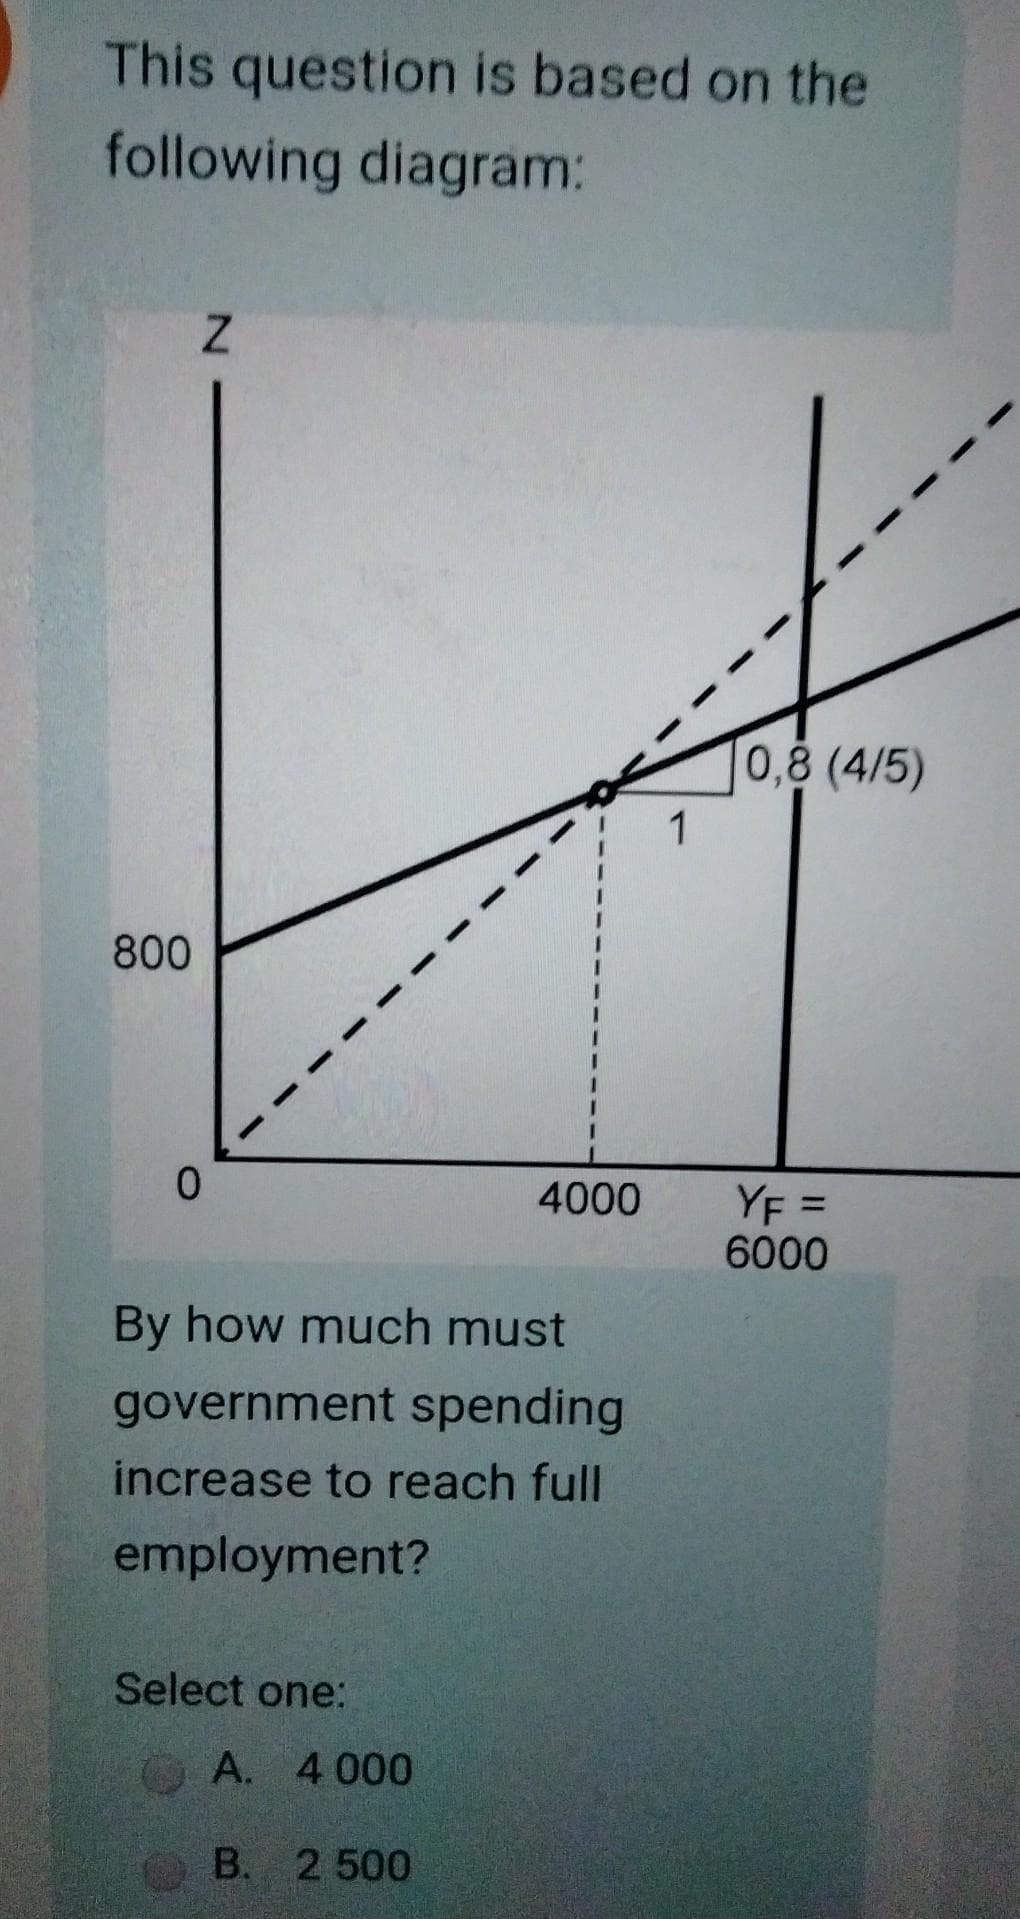 This question is based on the
following diagram:
800
Z
0
By how much must
government spending
increase to reach full
employment?
Select one:
4000
A. 4.000
B. 2 500
1
0,8 (4/5)
YF =
6000